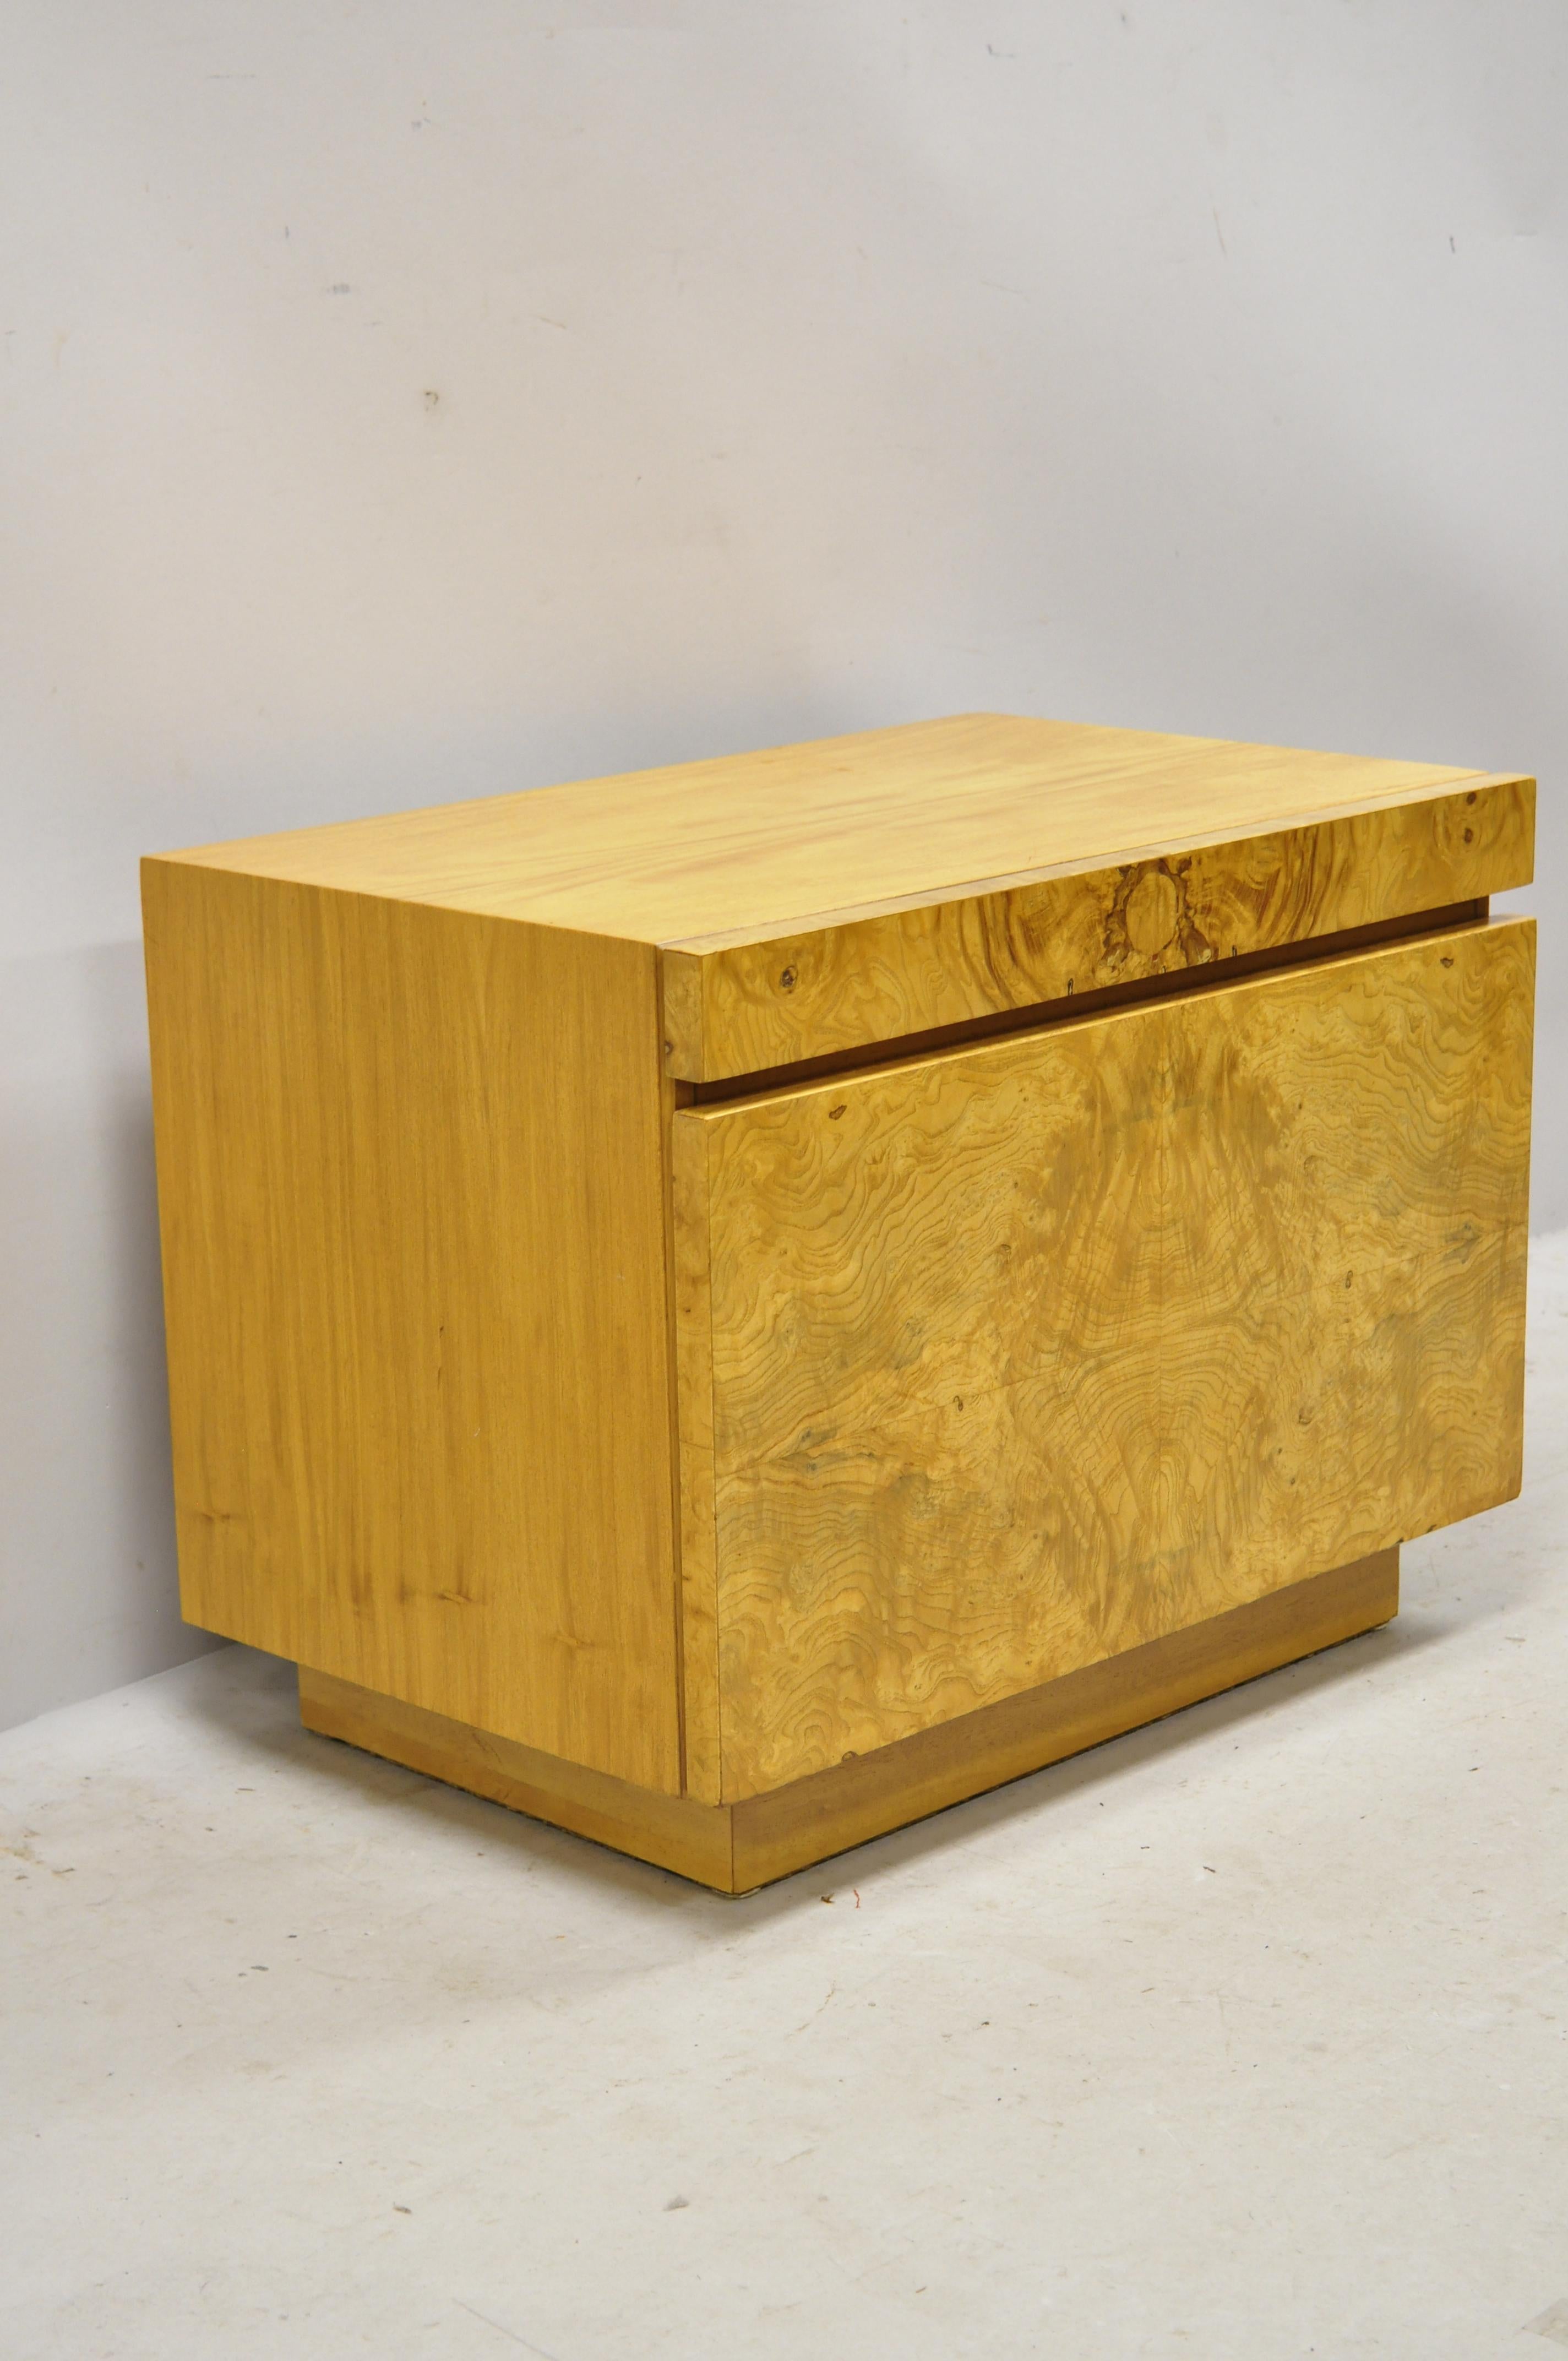 Mid-Century Modern lane burl wood Milo Baughman style nightstand bedside table. Item features one deep drawer, one pullout / pull-out surface, beautiful wood grain, original stamp, clean modernist lines, quality American craftsmanship, circa